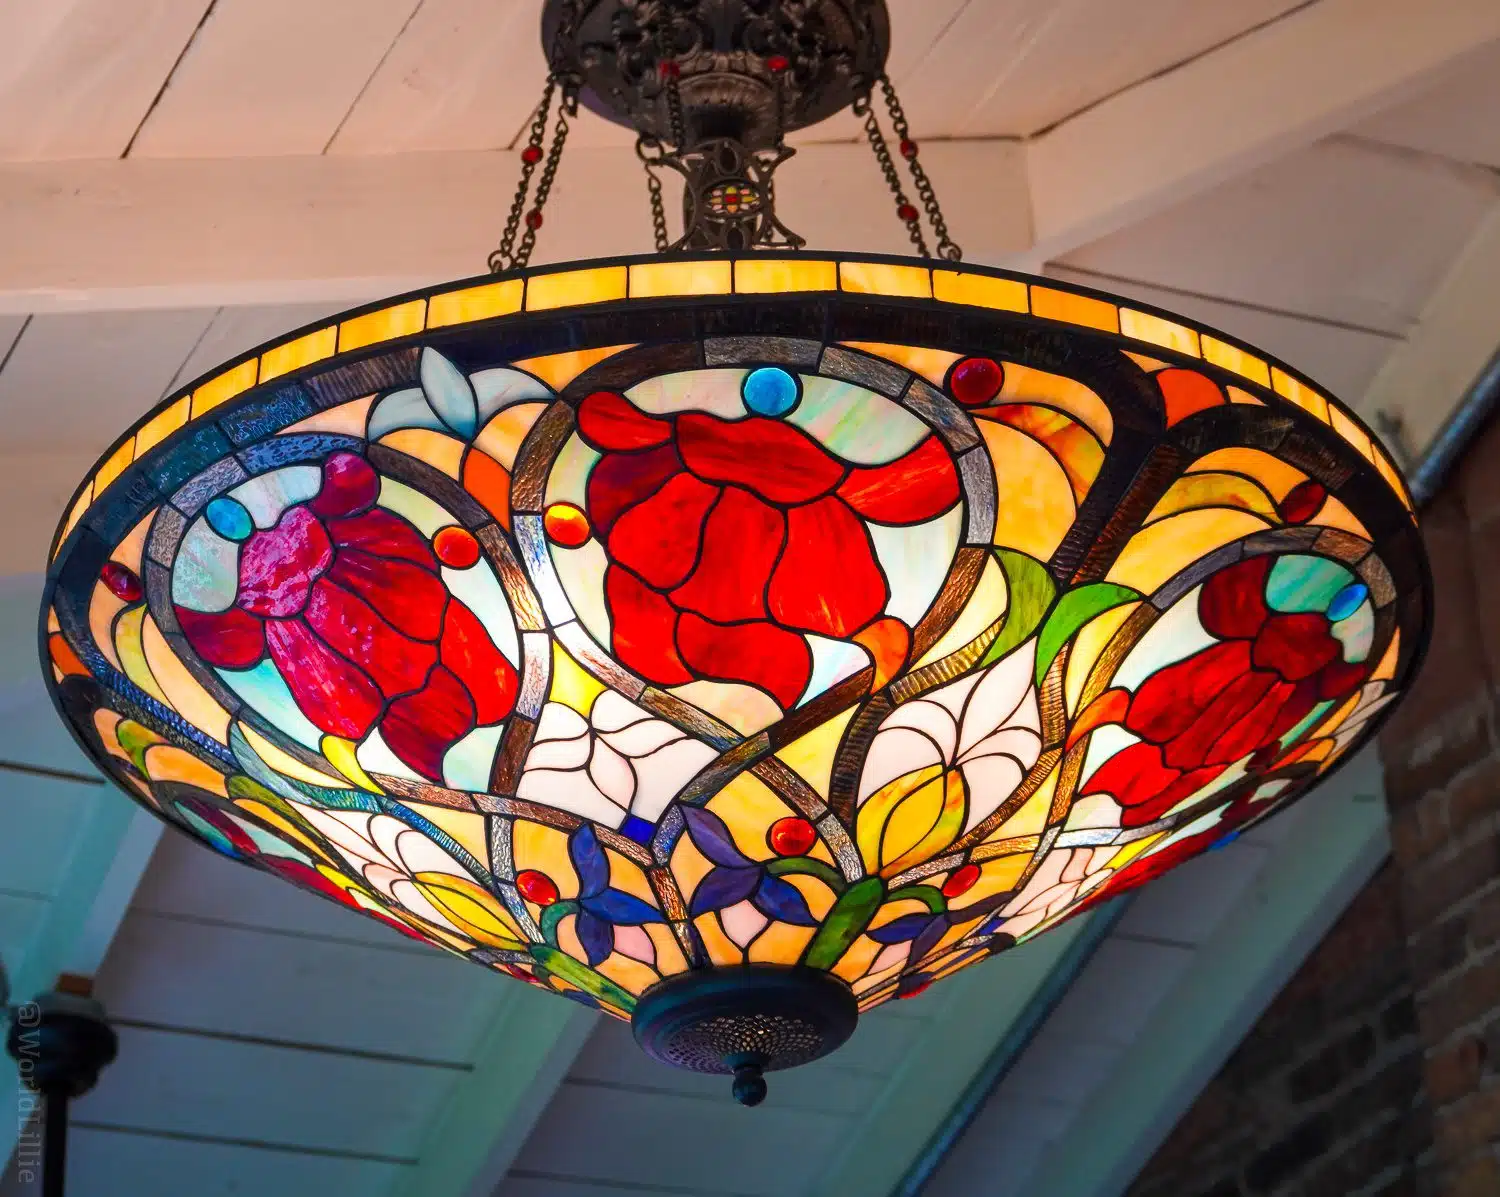 A close-up of the stained glass chandelier at Myriam's Table.